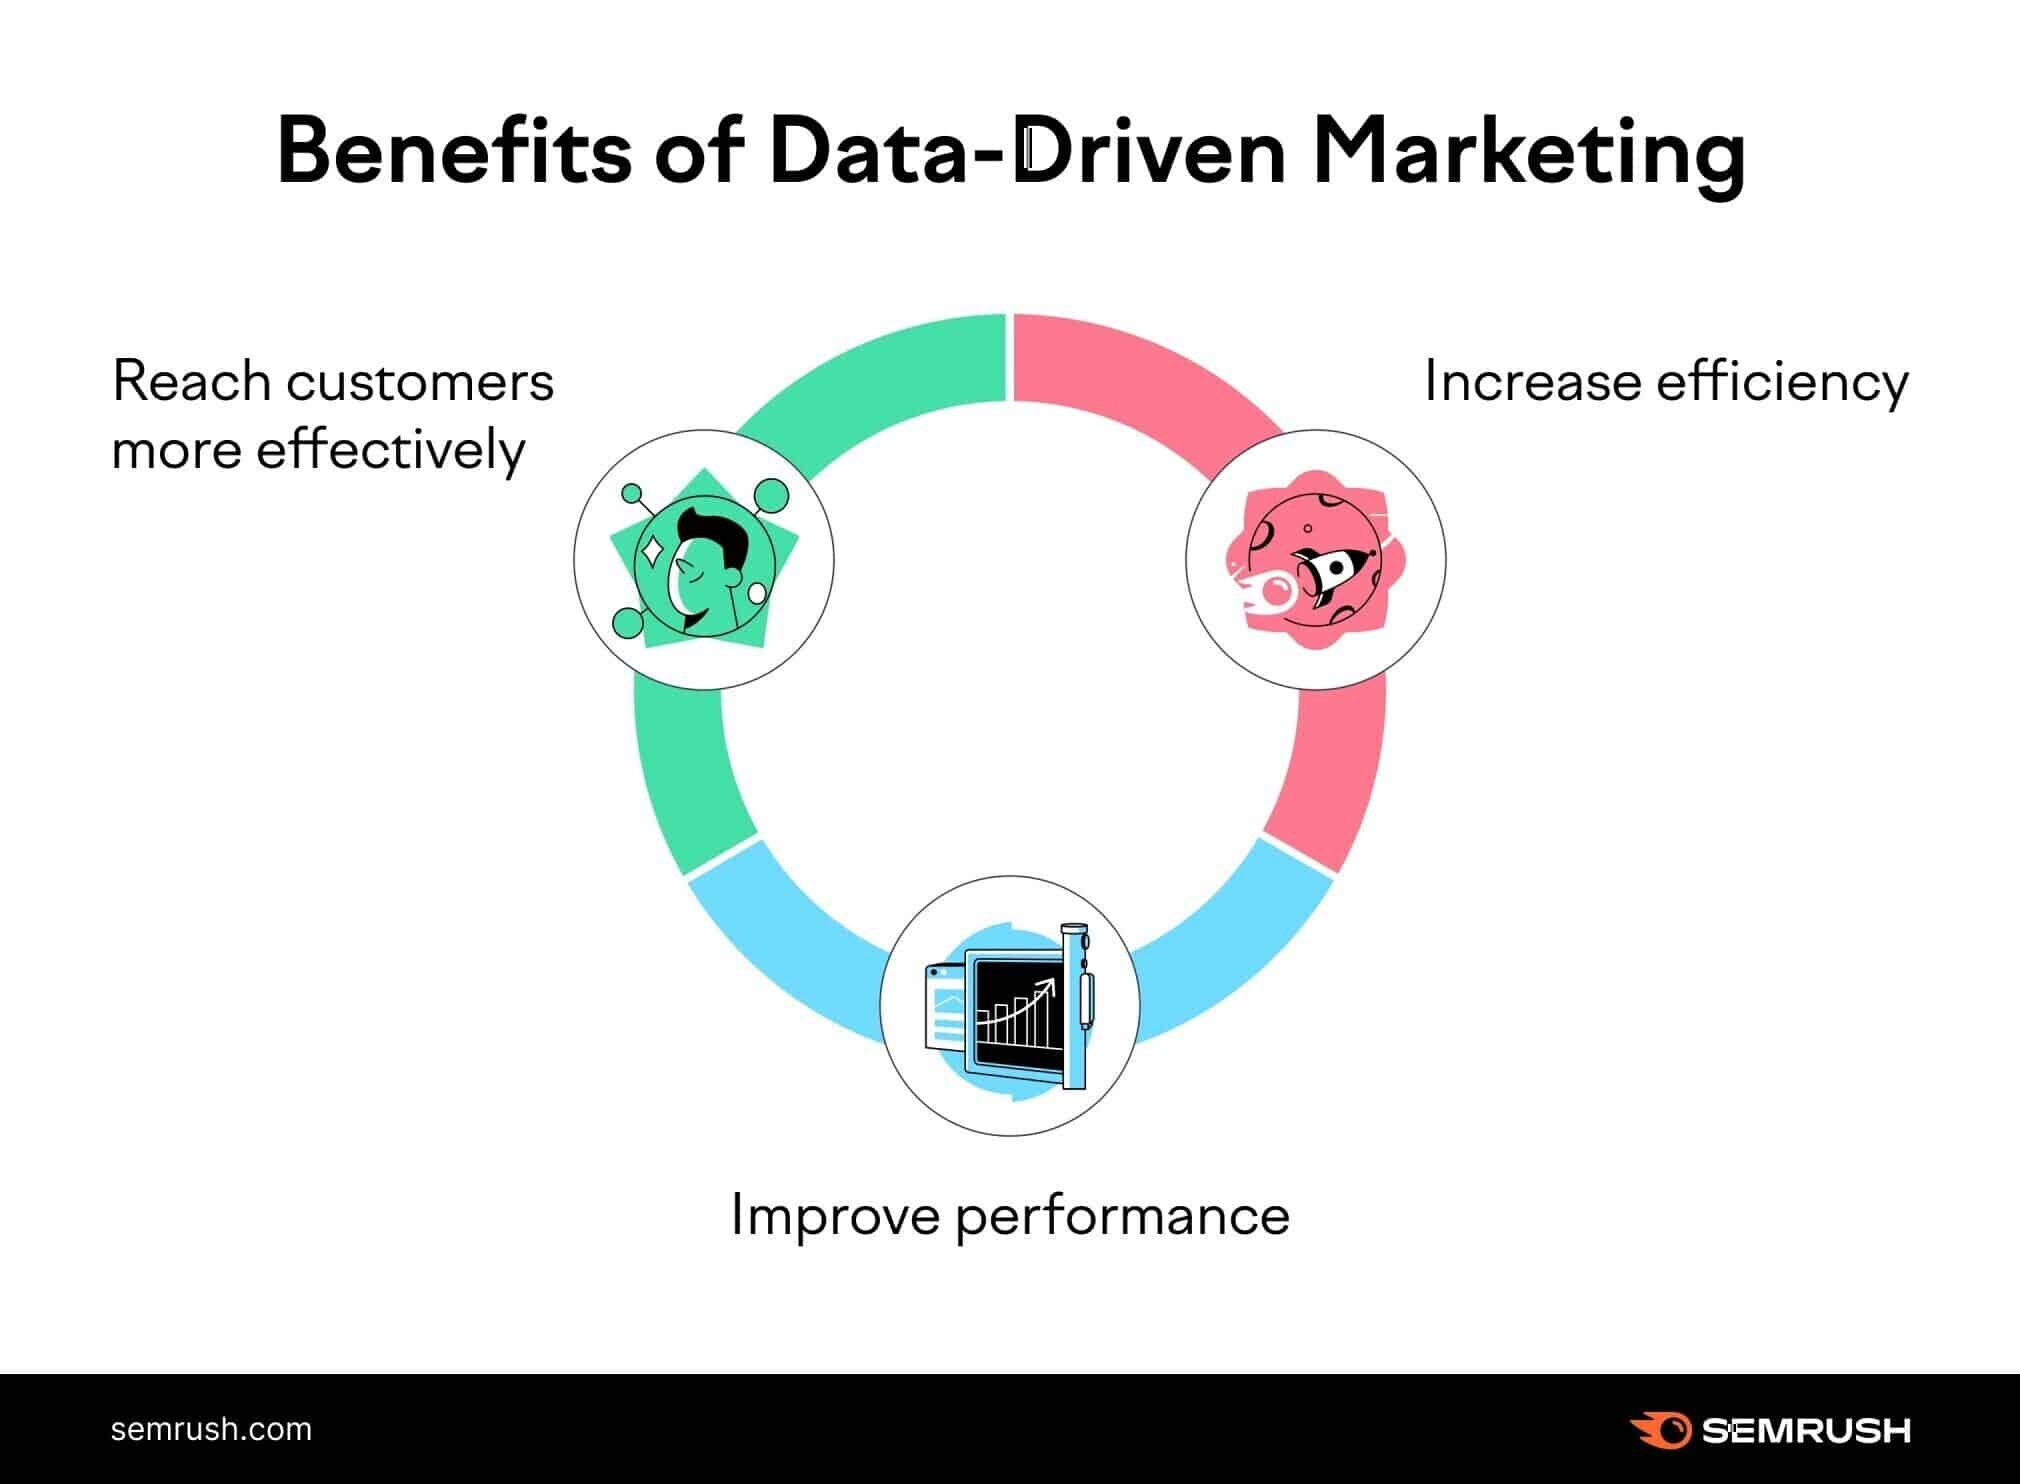 Graphic showing three main benefits of data-driven marketing: reaching customers more effectively, improving performance, and increasing efficiencies